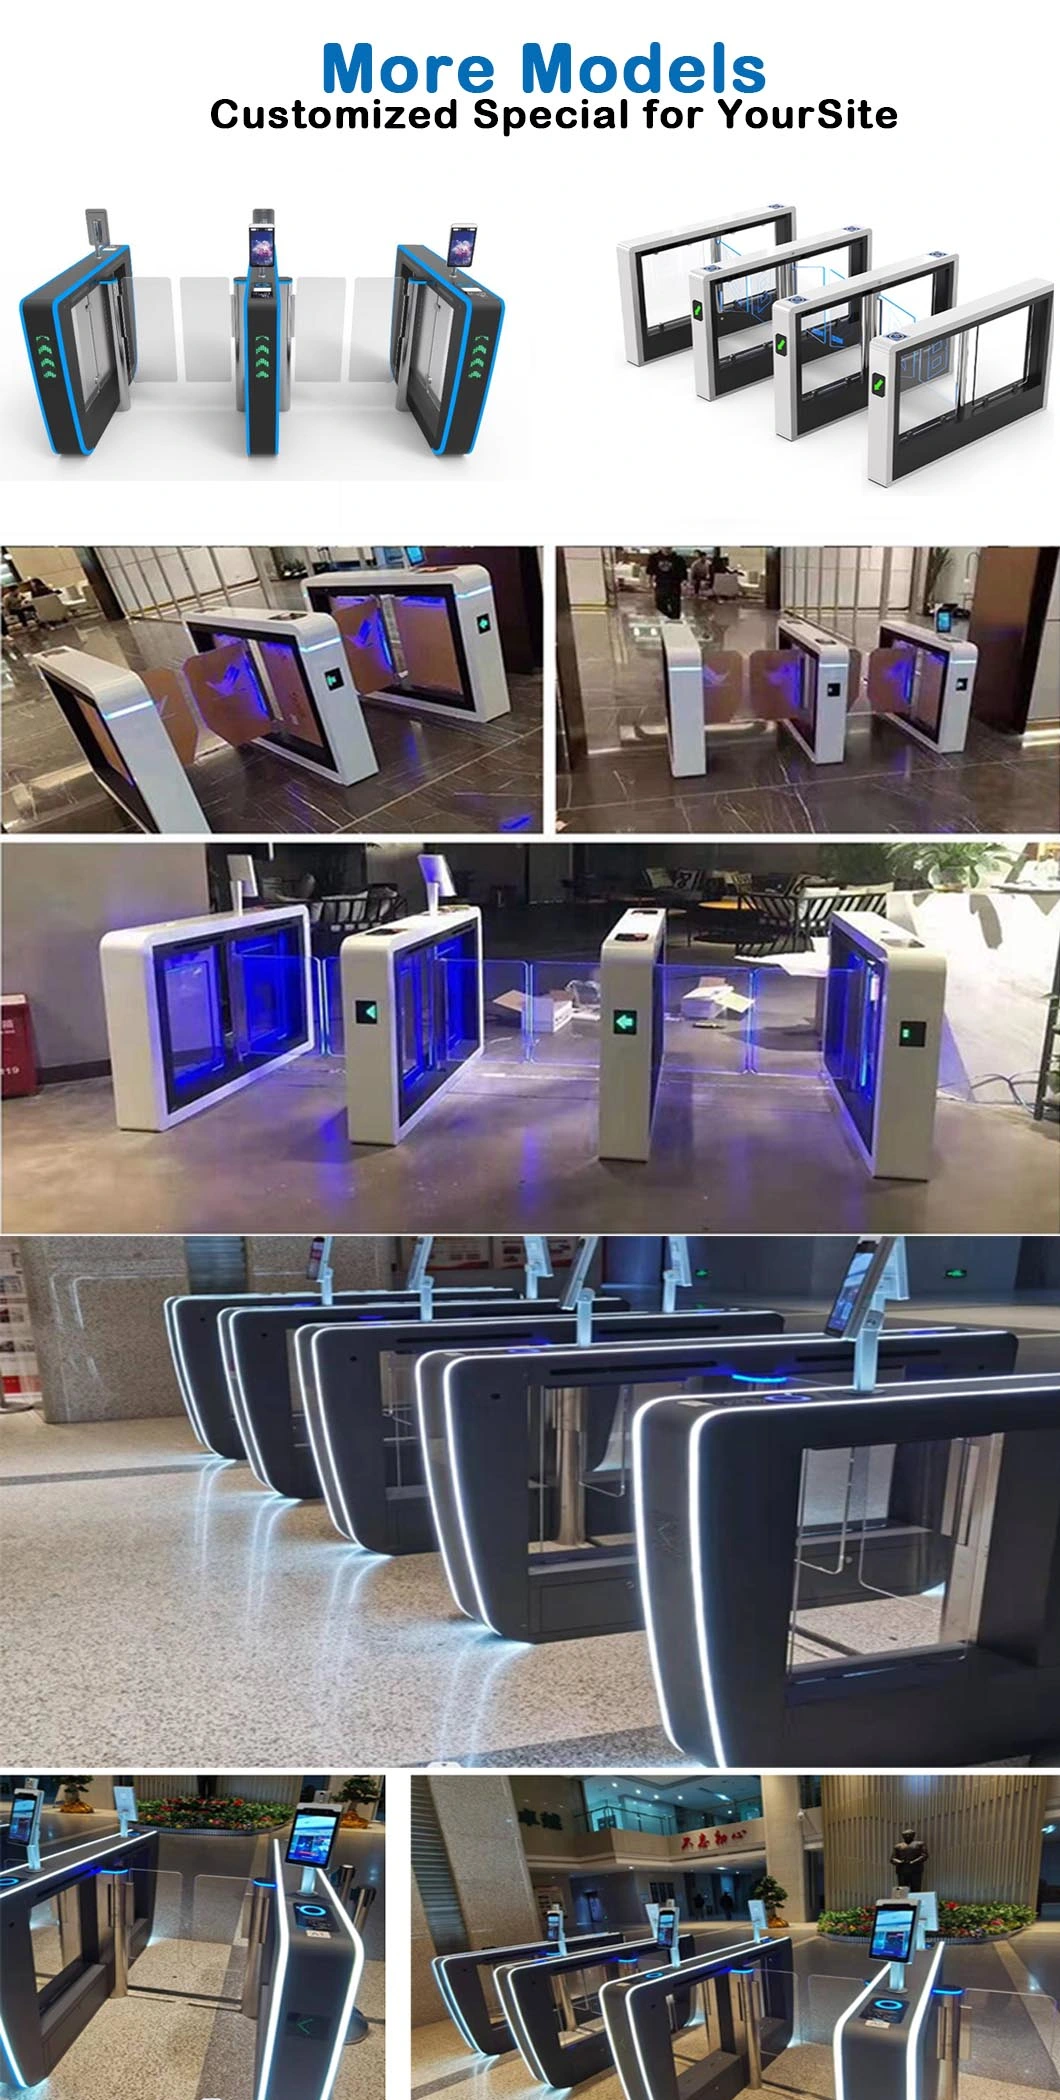 Customized 900mm Automatic Swing Turnstile Speed Gate with Face Recognition System